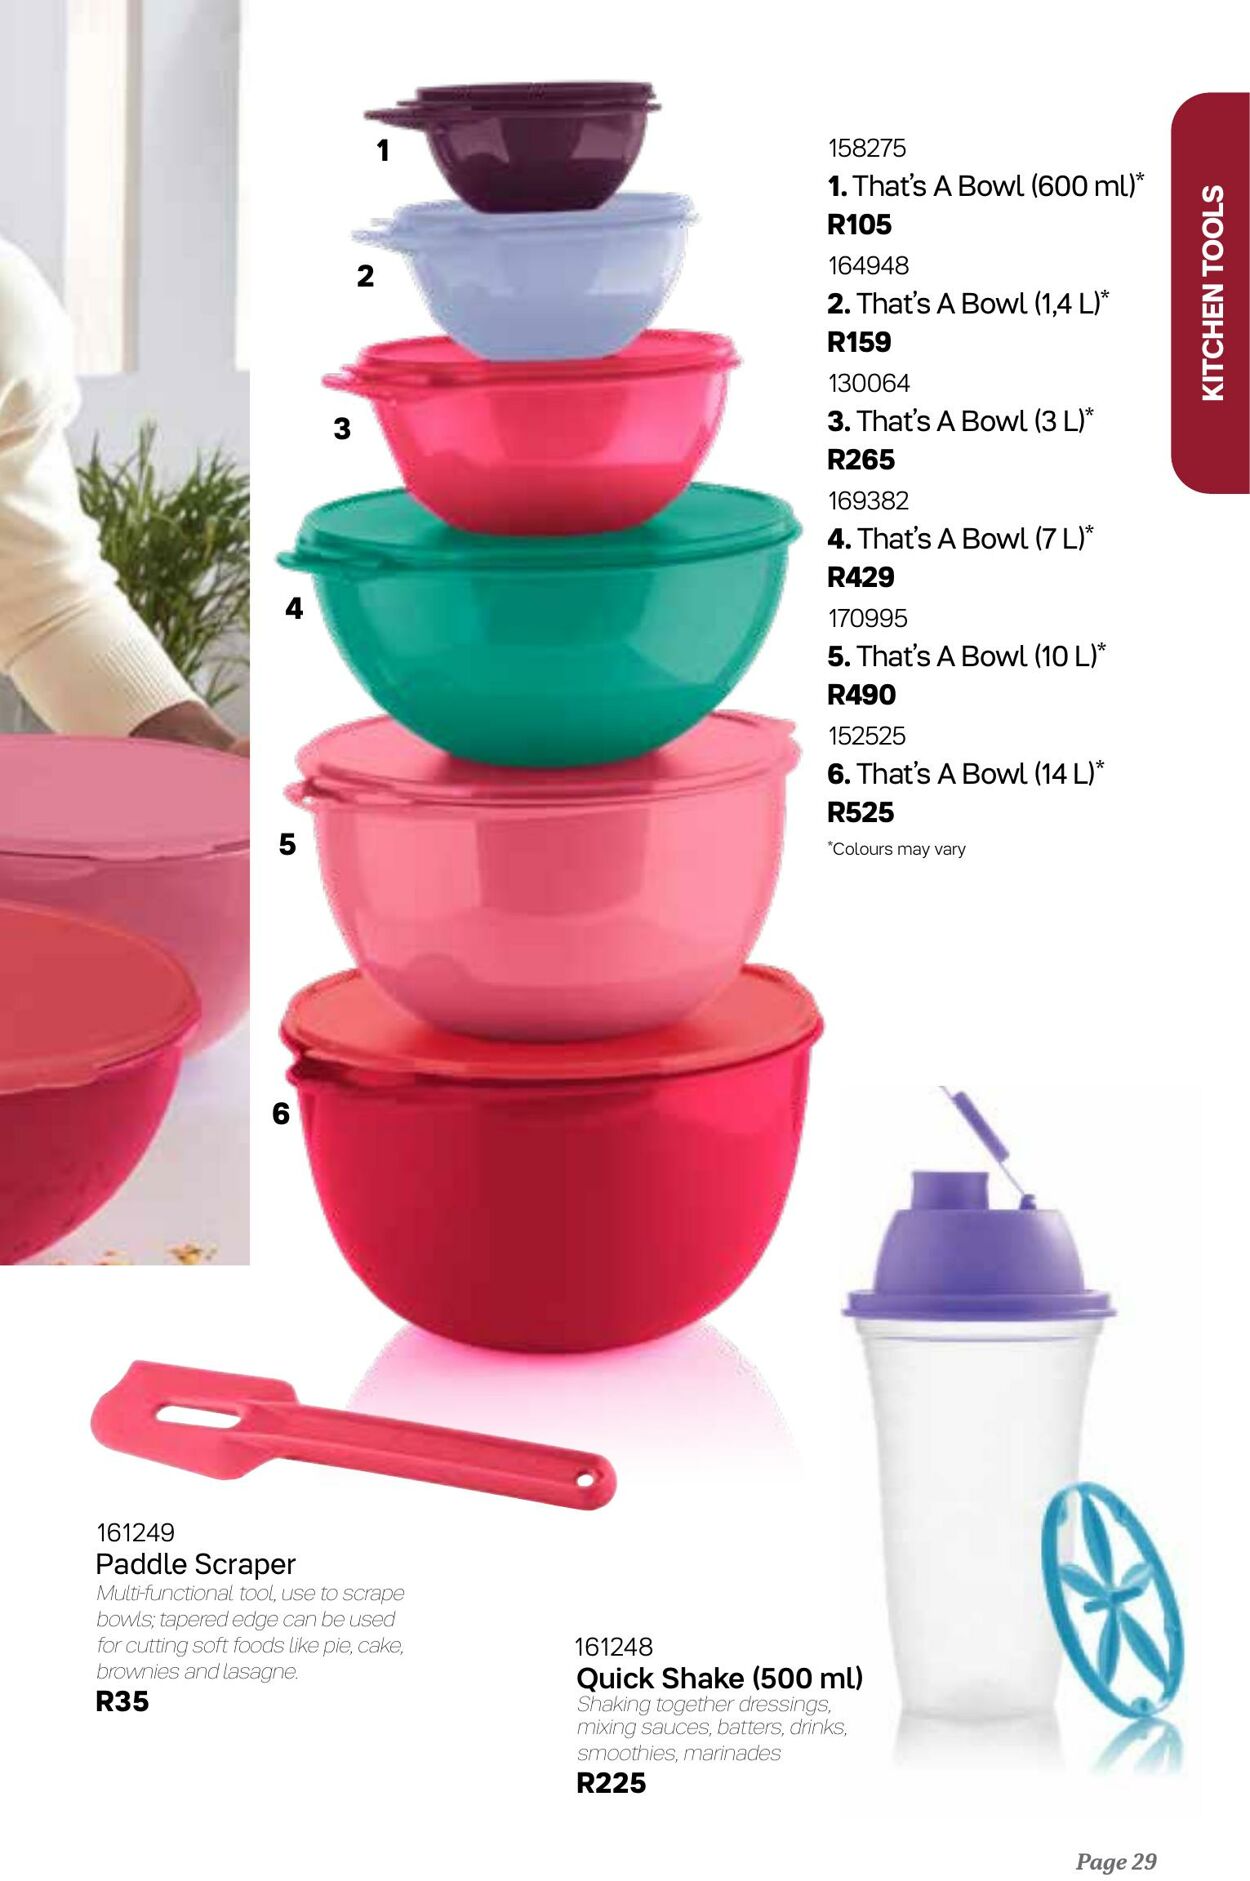 https://static.za-specials.com/images/promotions/tupperware/the-pride-of-africa-rsa-9a8f47cf20/f554aa870af0.jpg